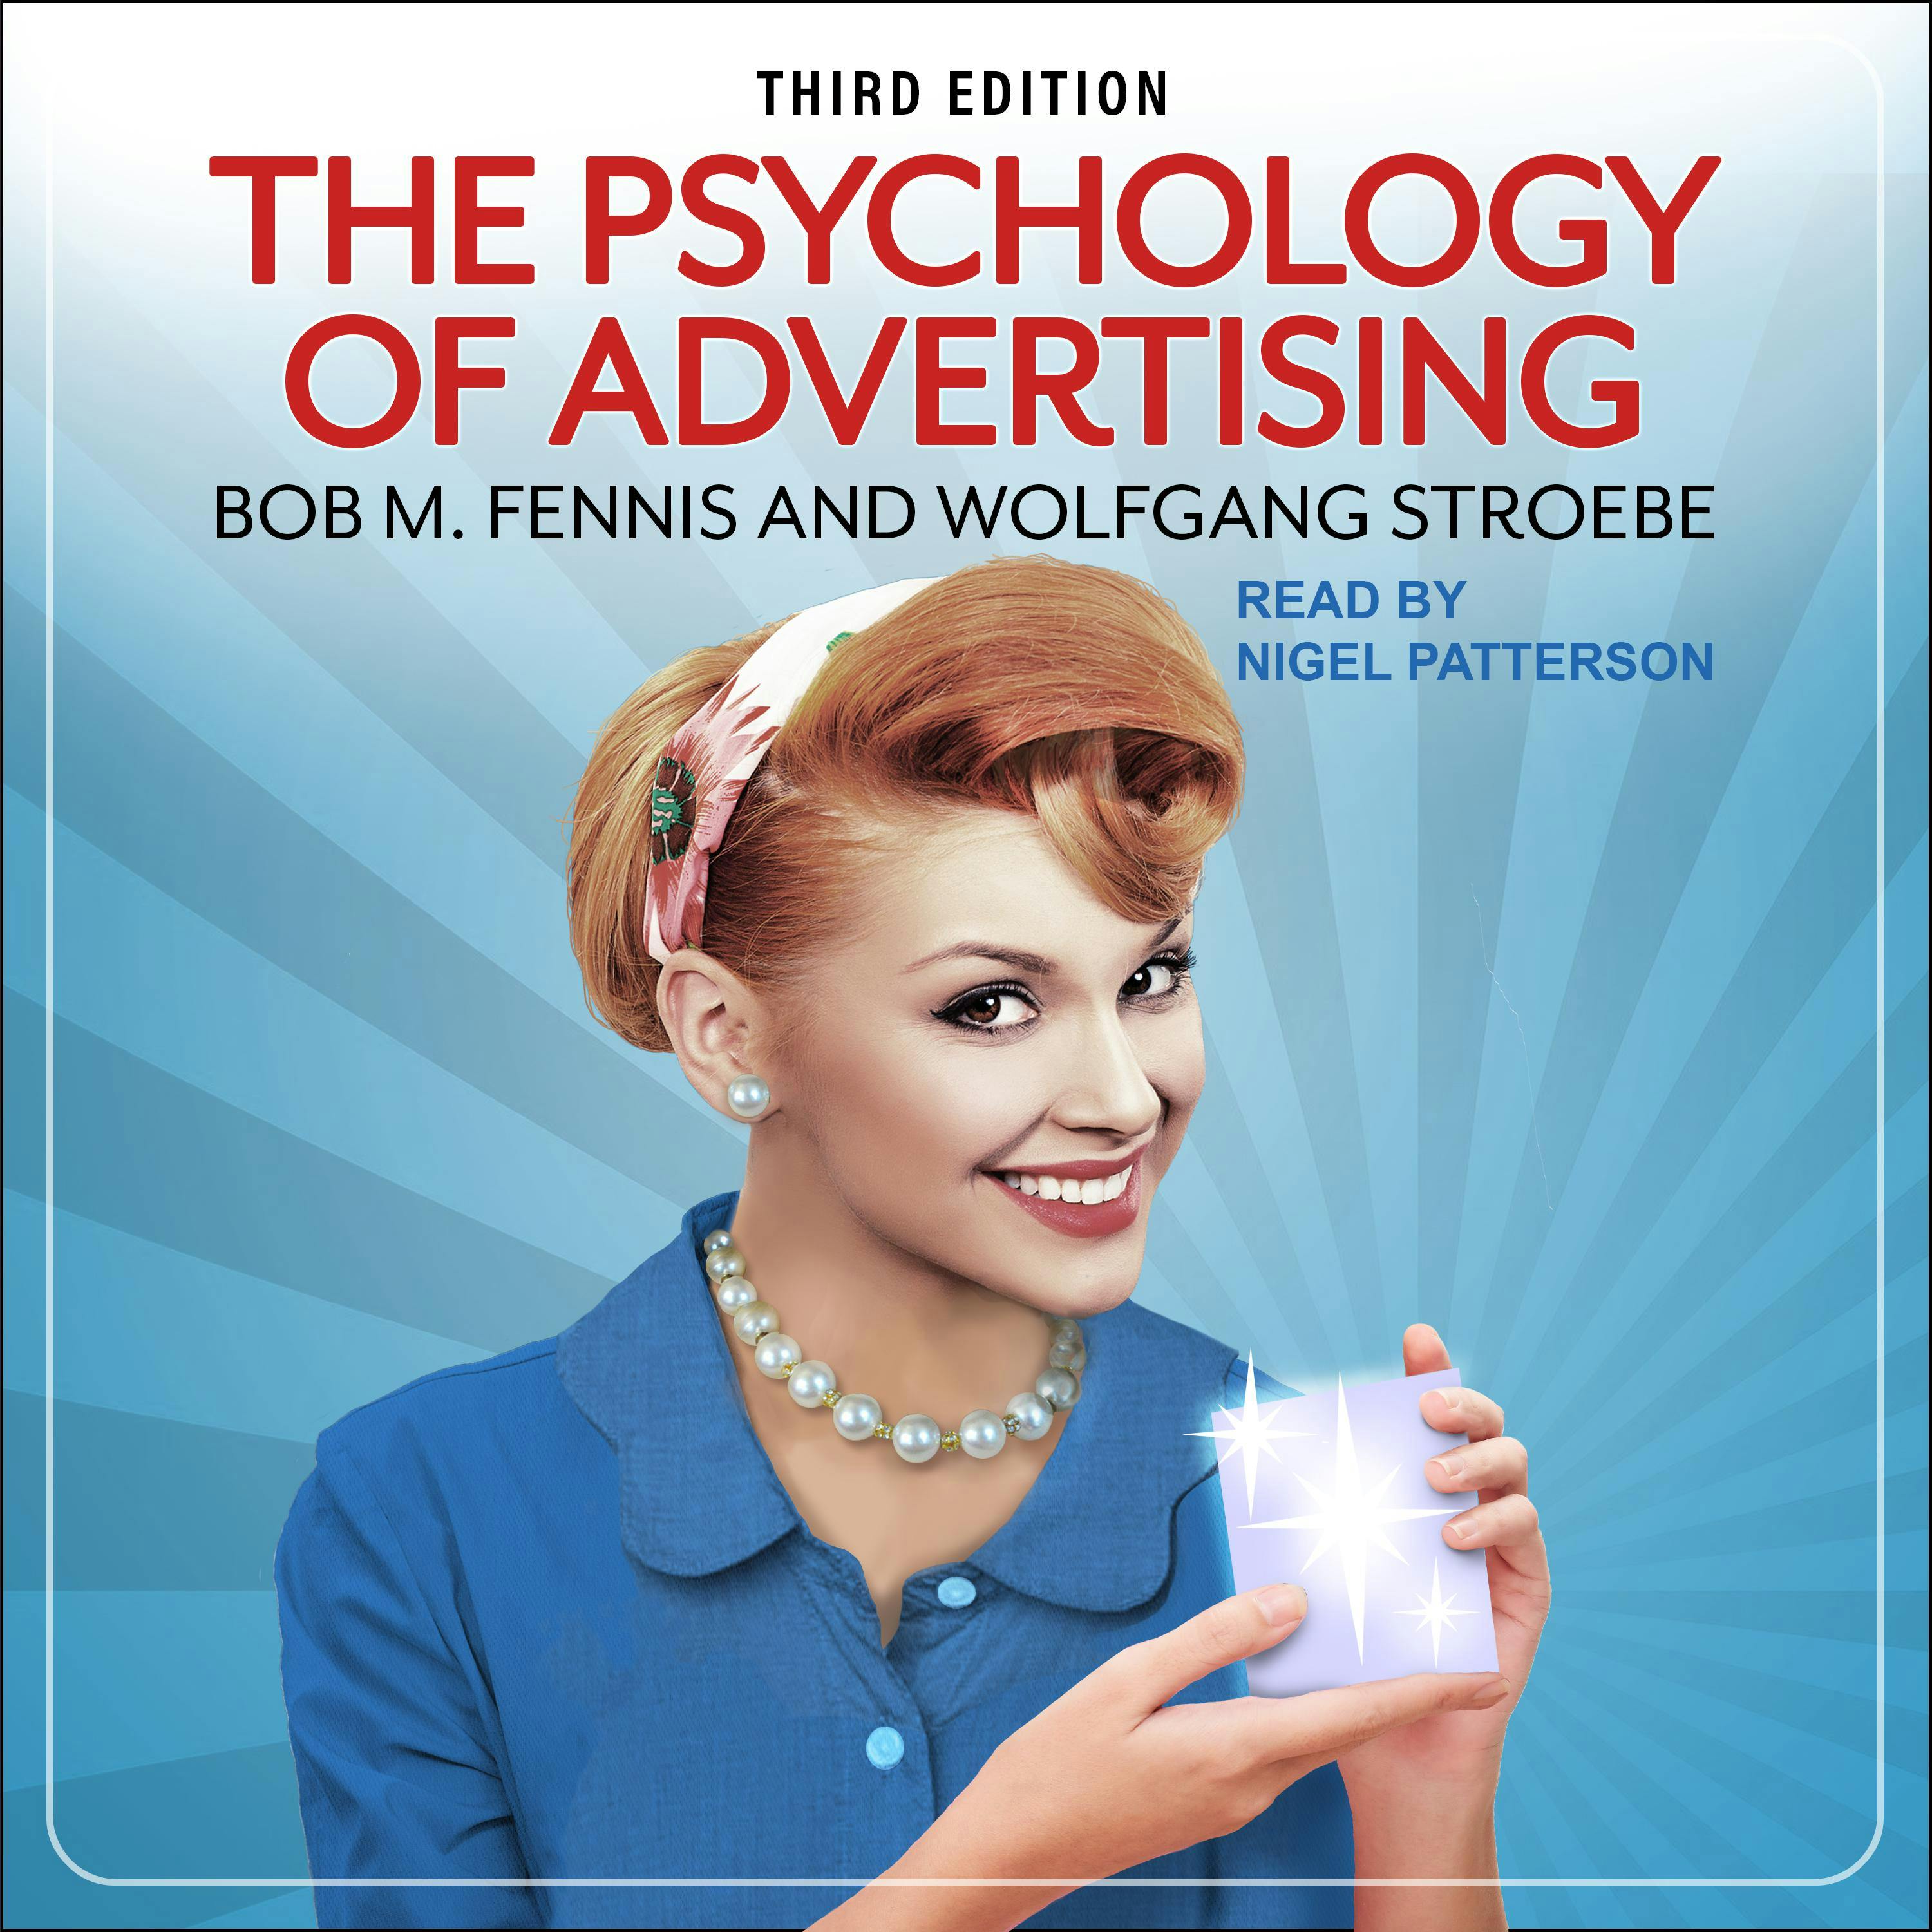 The Psychology of Advertising: 3rd Edition - Wolfgang Stroebe, Bob M. Fennis